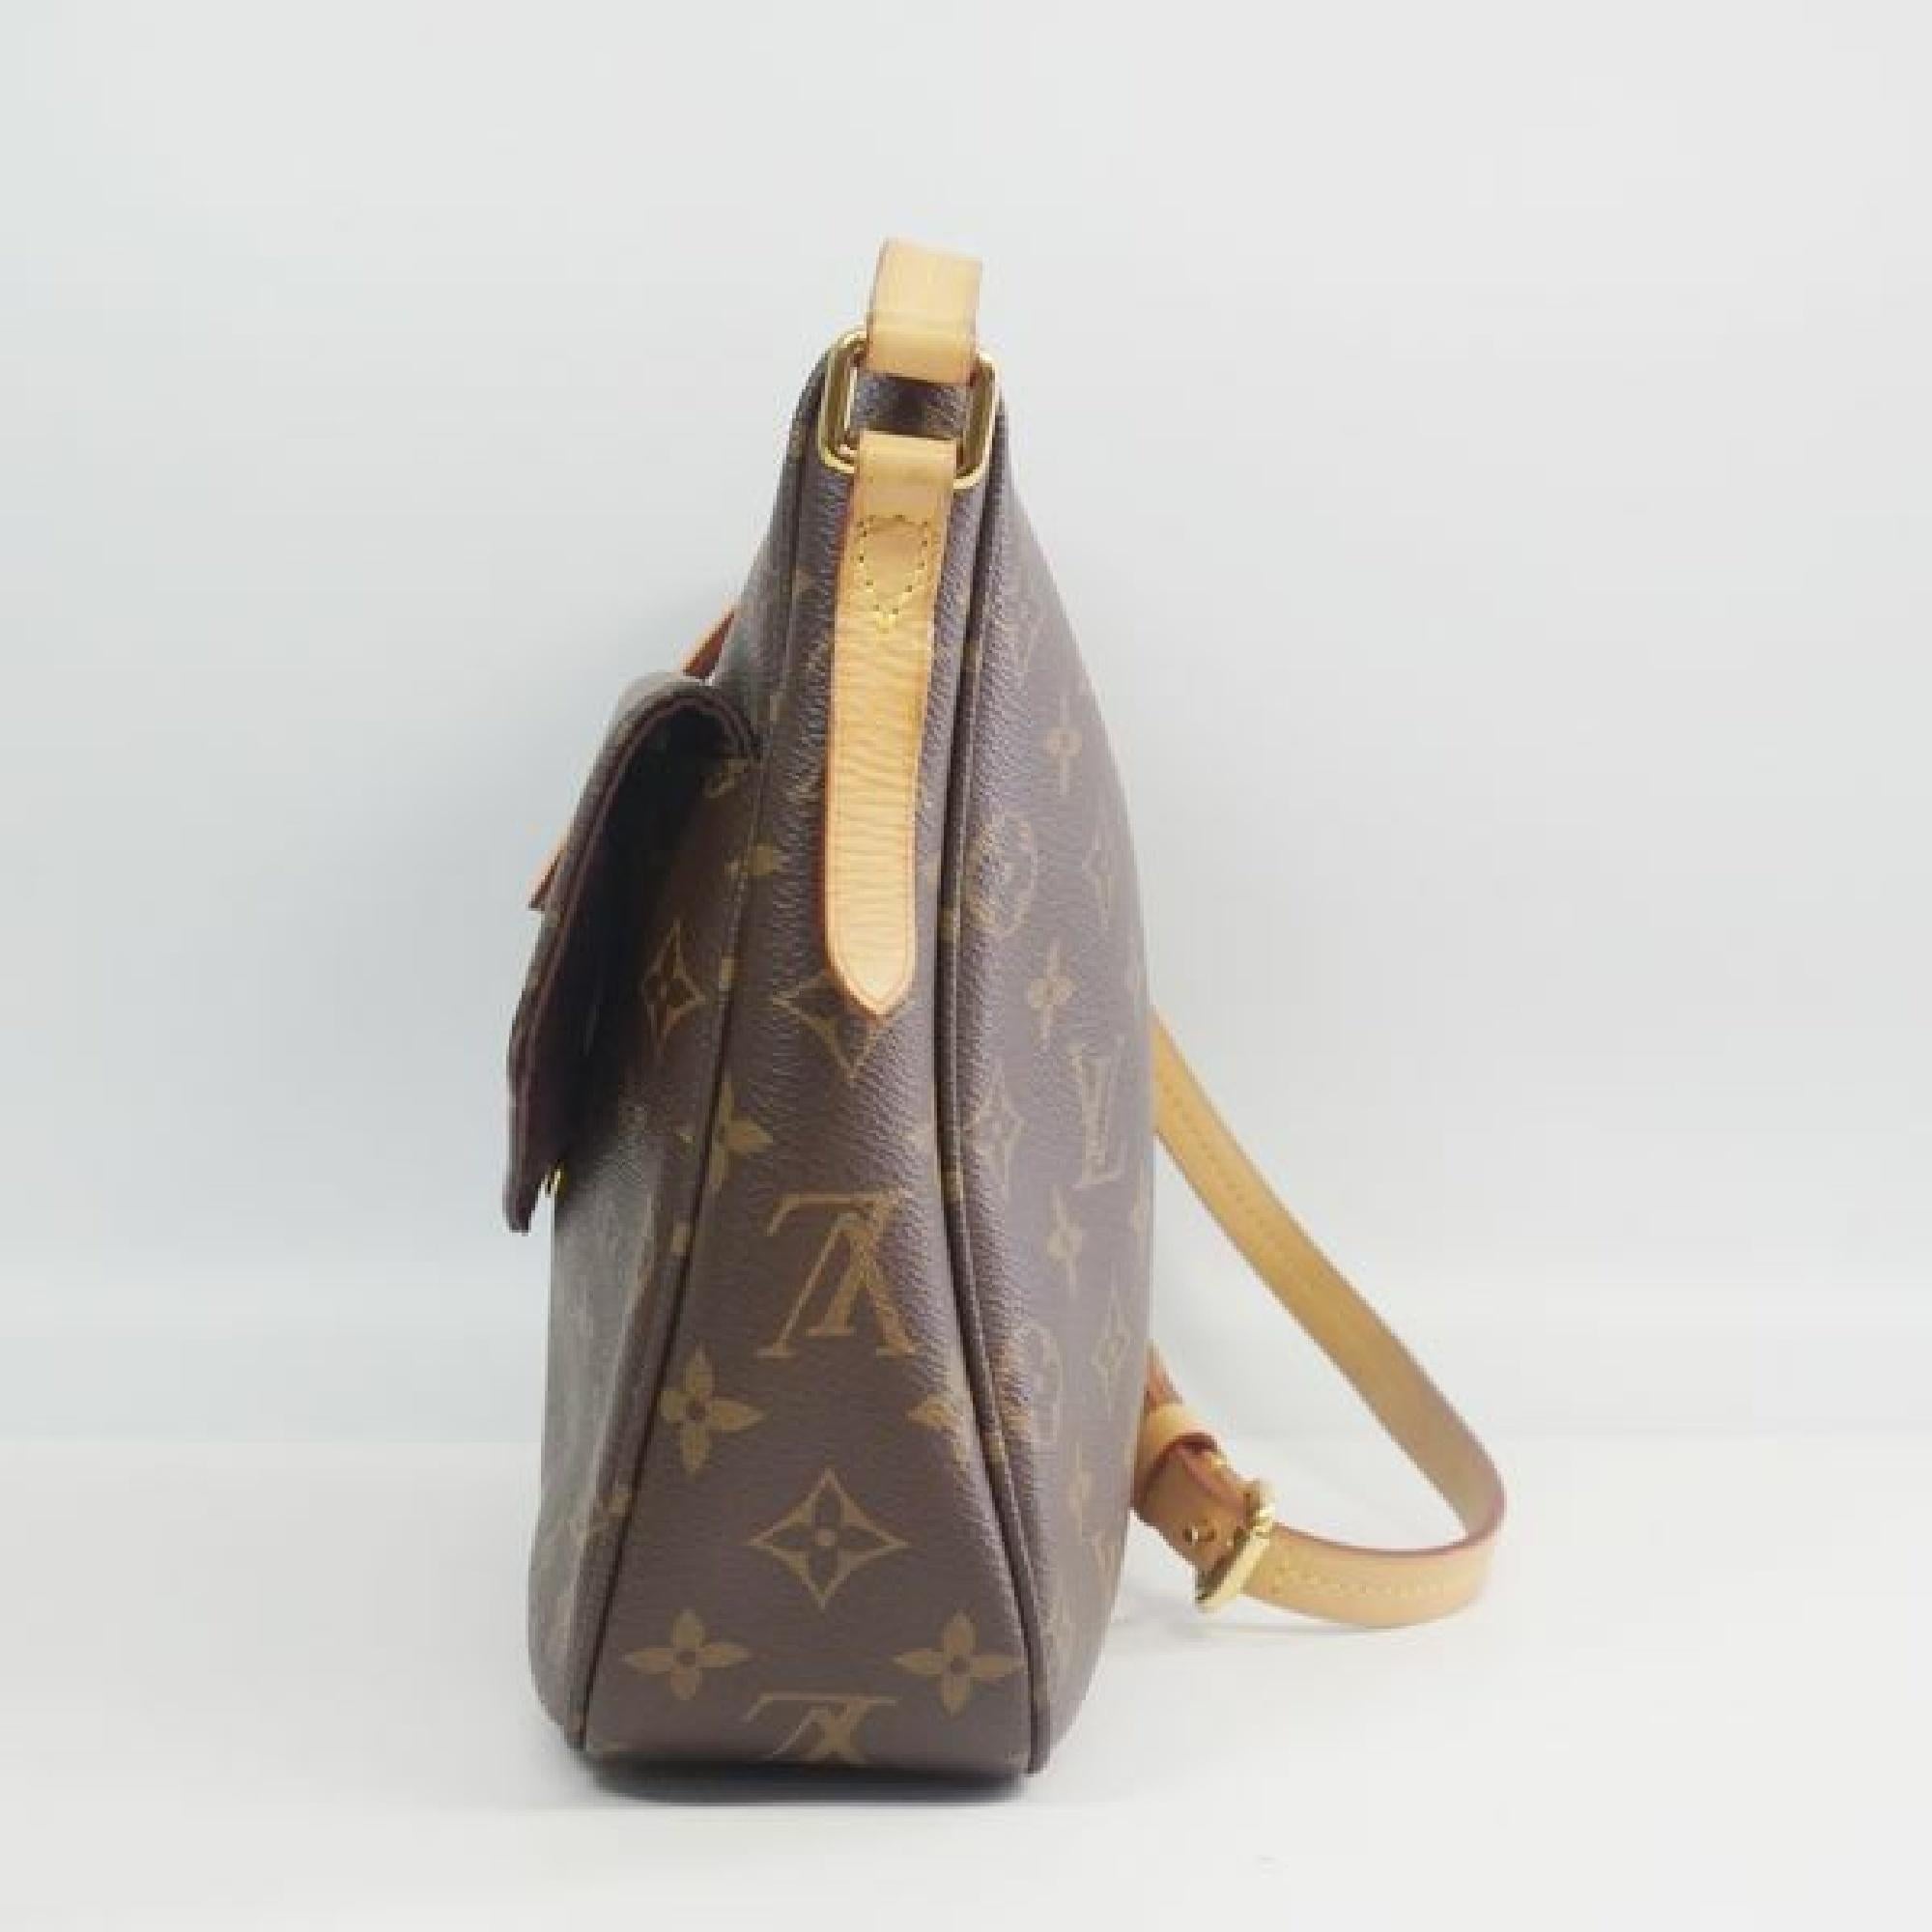 An authentic LOUIS VUITTON Mabillon Womens shoulder bag M41679 The outside material is Monogram canvas. The pattern is Mabillon. This item is Contemporary. The year of manufacture would be 2017.
Rank
AB signs of wear (Small)
Used goods in good